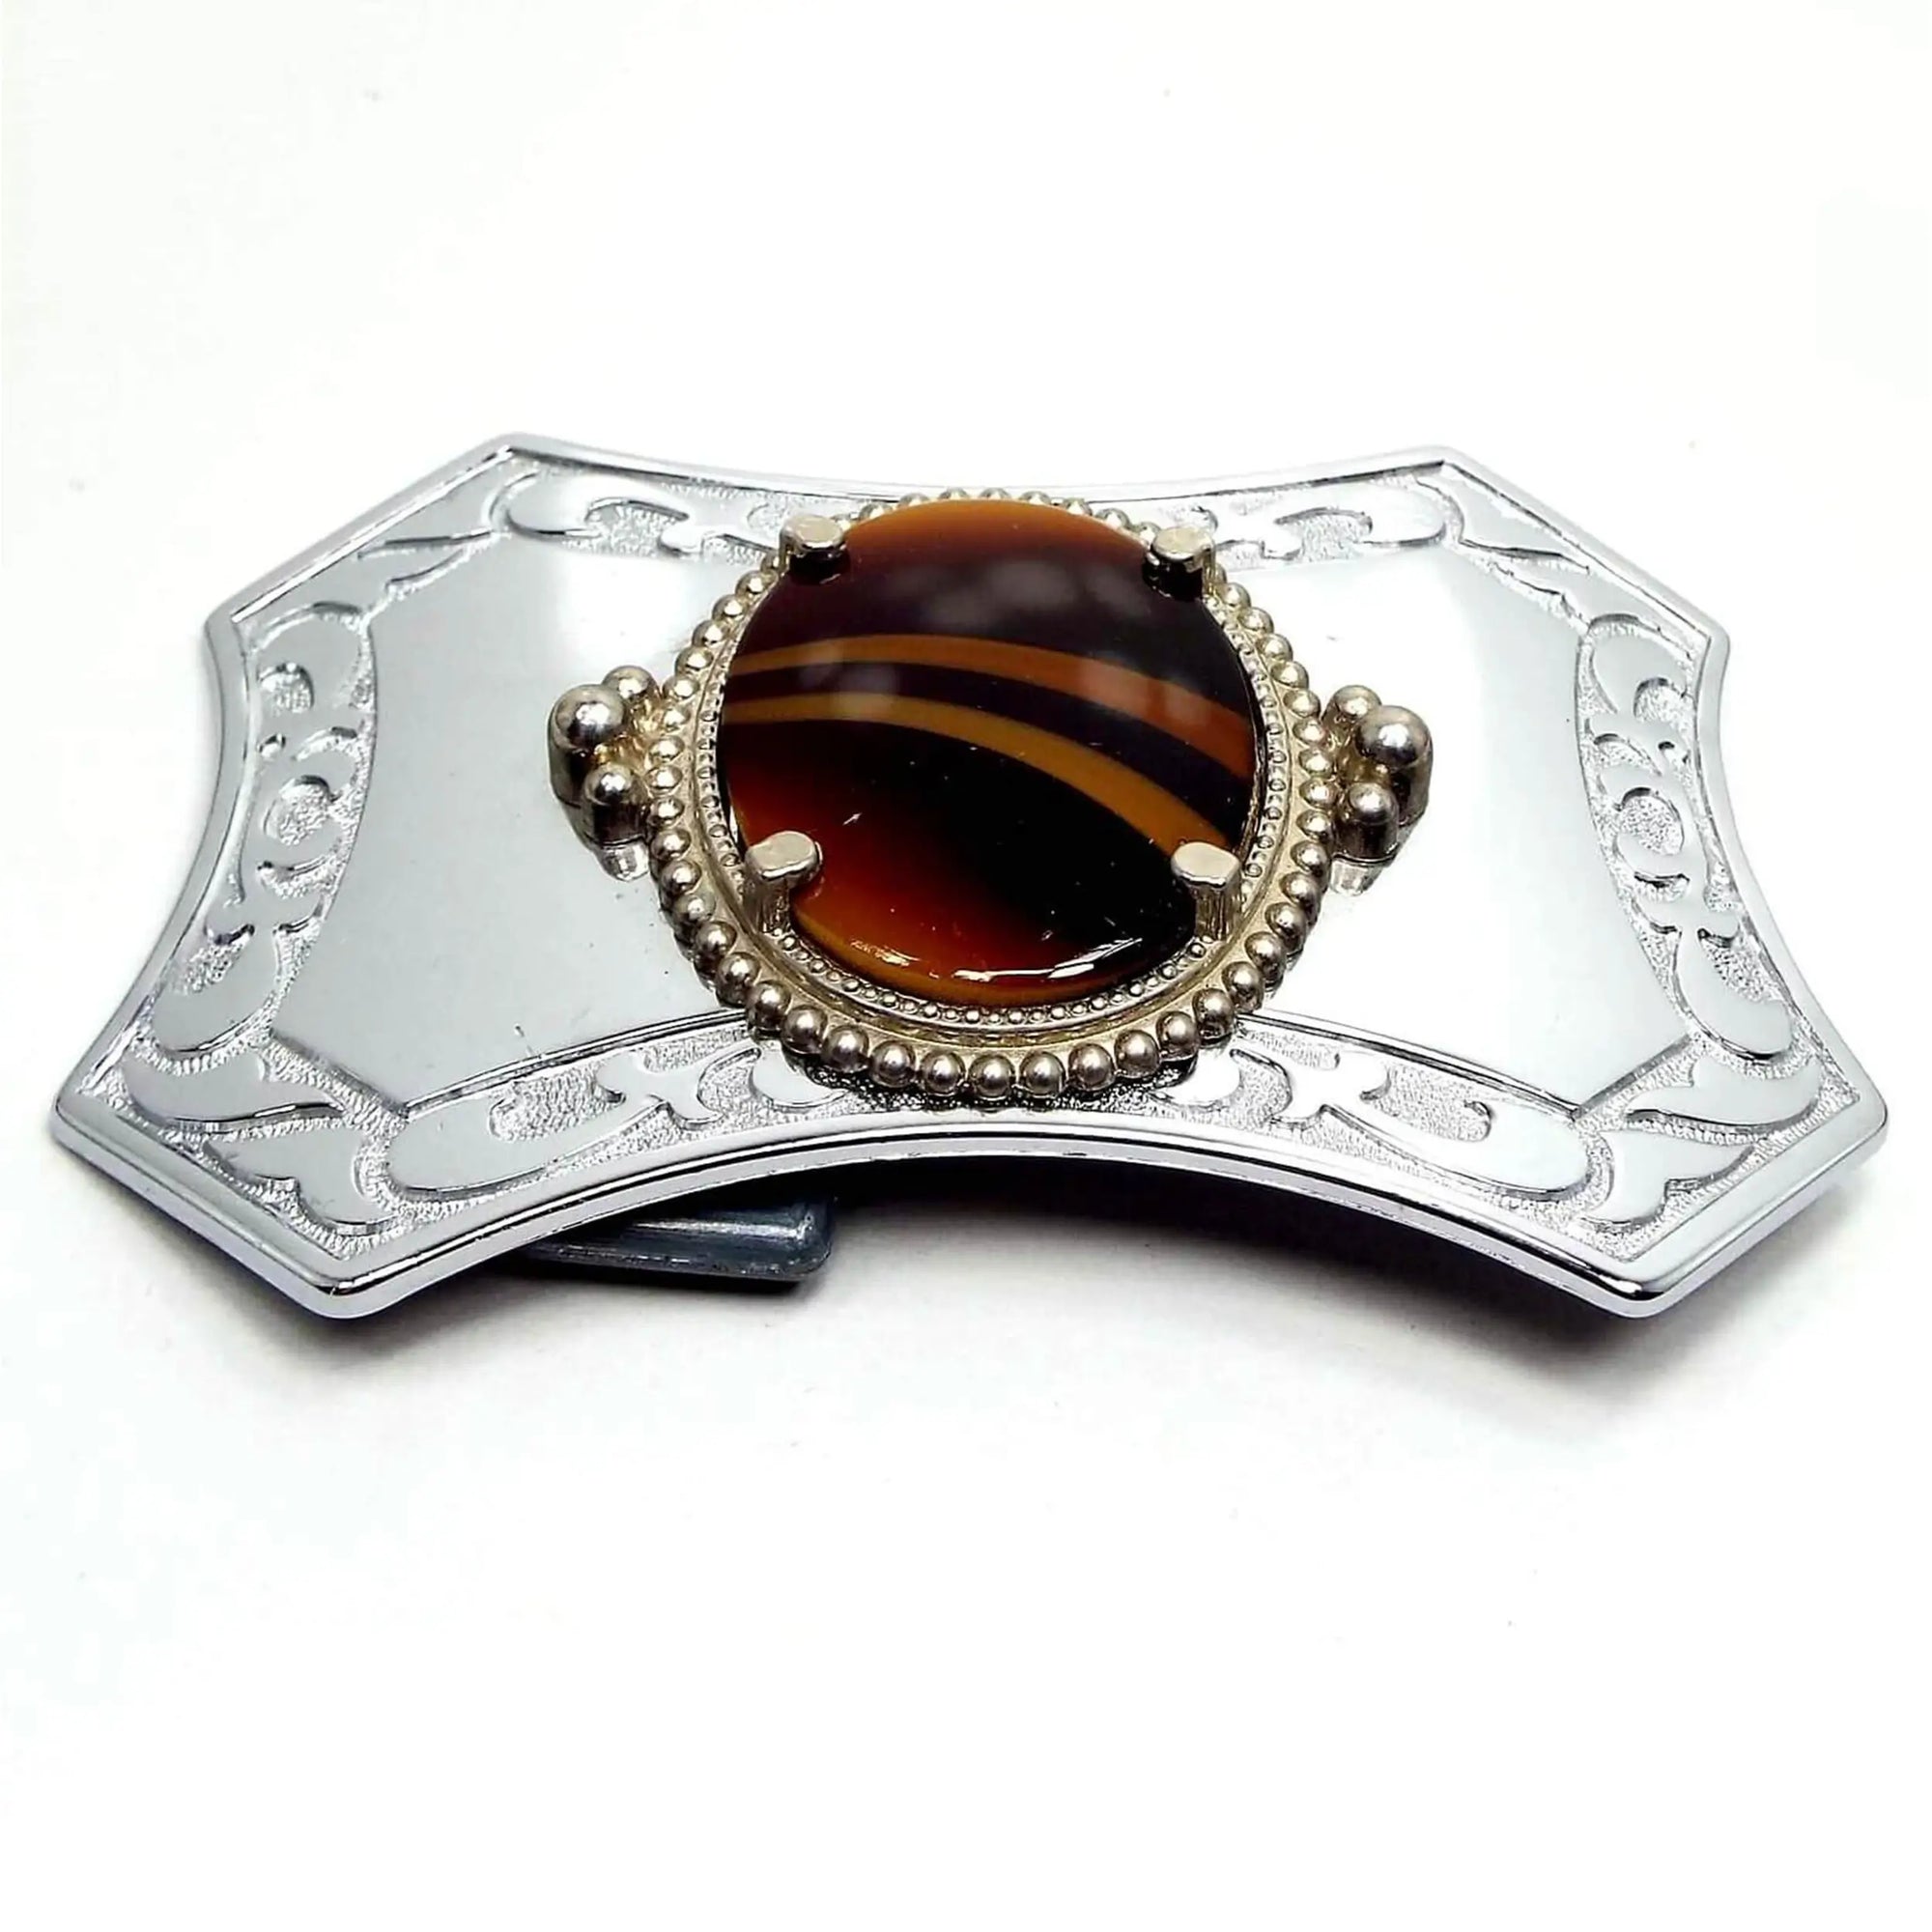 Front view of the retro vintage belt buckle with fancy glass cab. The buckle is silver tone in color and has angled out edges. There is an oval glass cab in the middle with shades of brown and hints of yellow with two angled stripes curving through the middle.